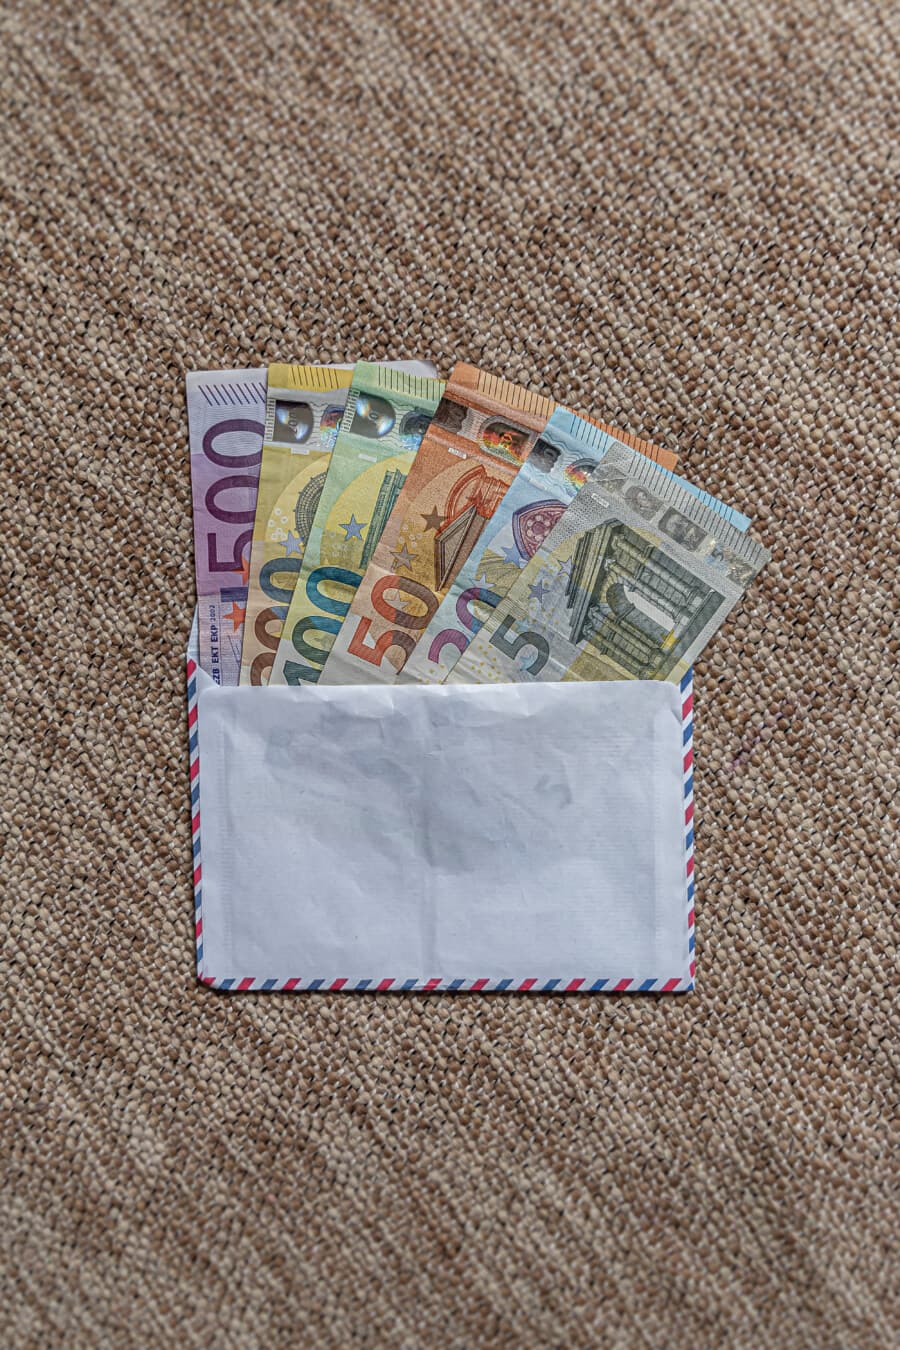 envelope, Europe union, banknote, euro, paper money, savings, income, money, currency, cash